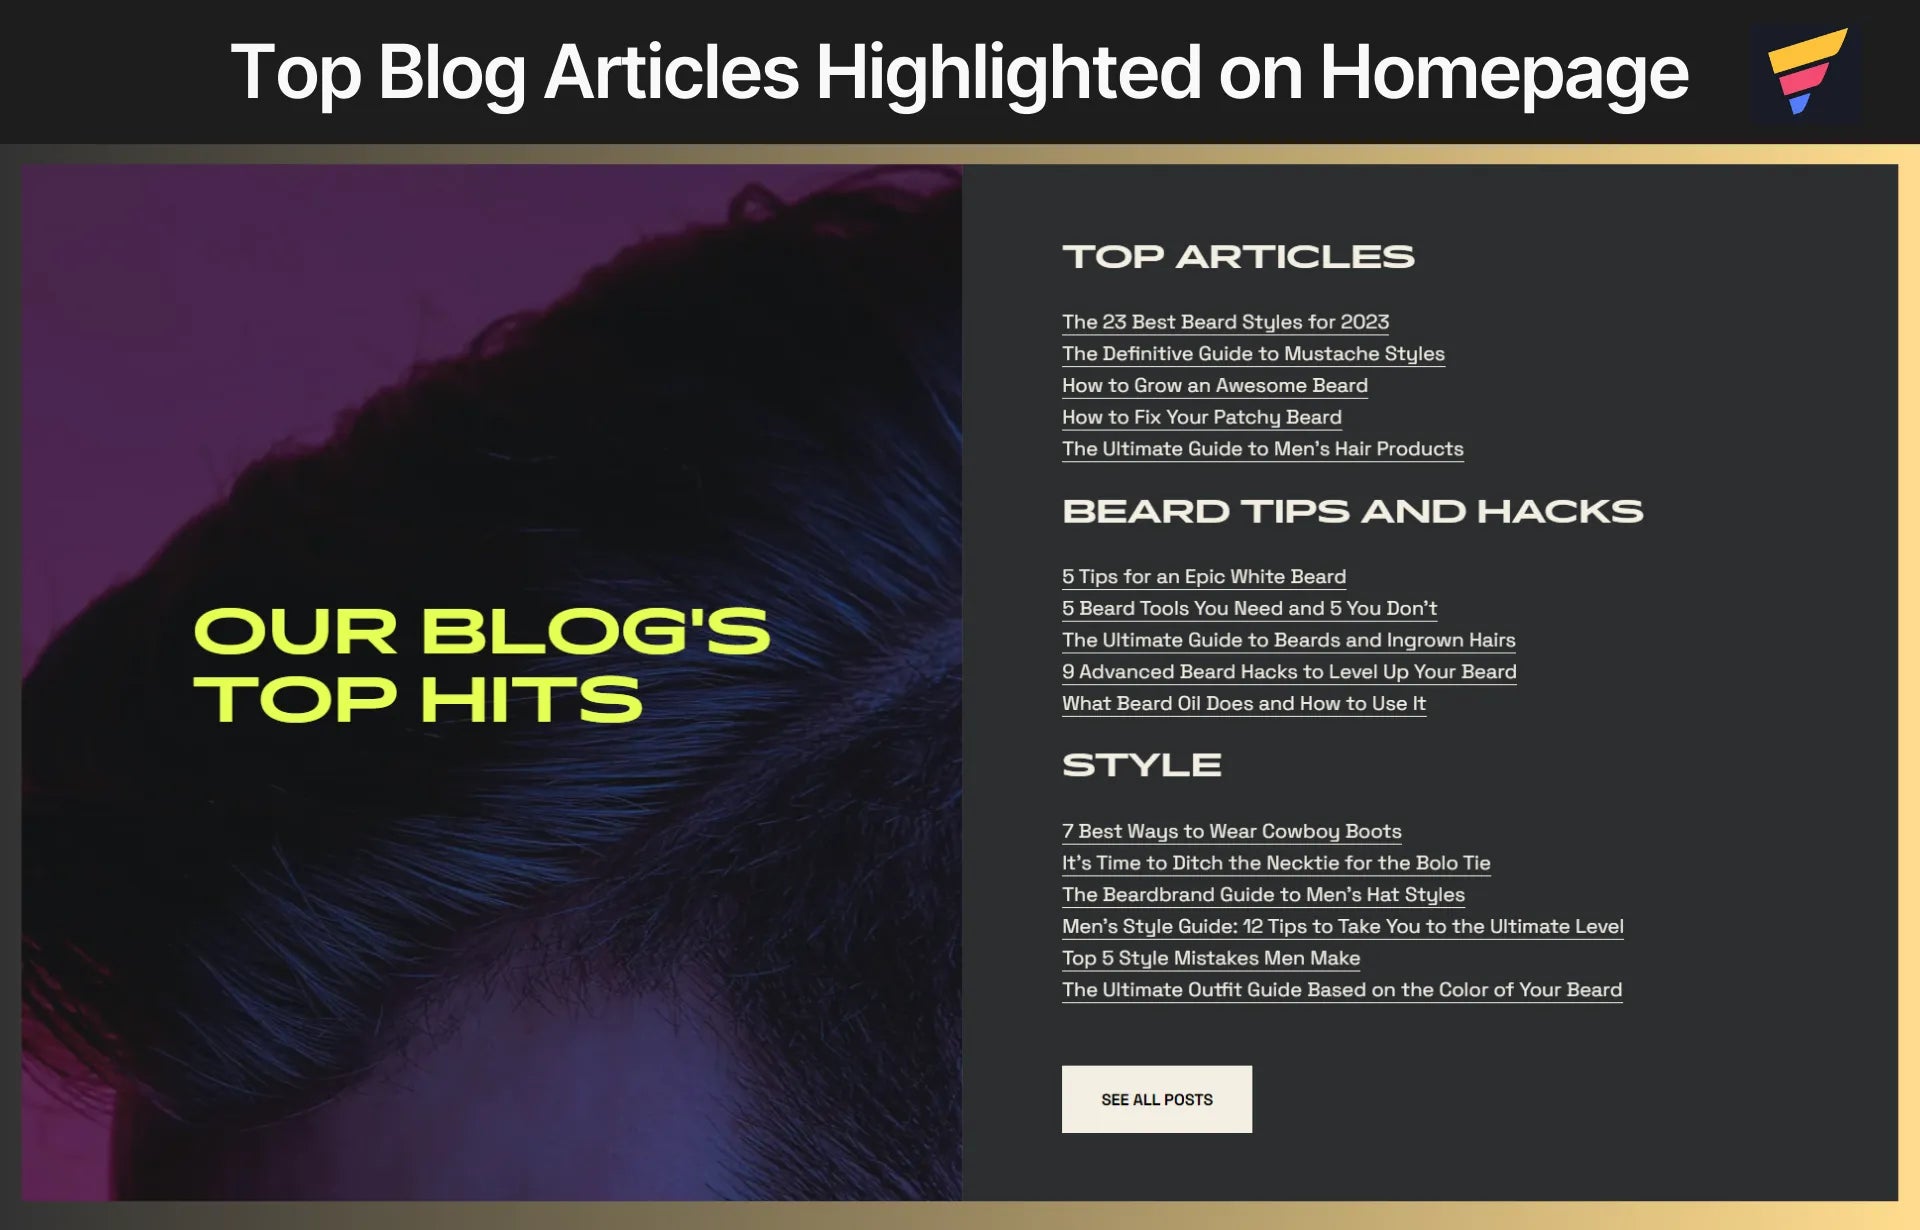 Top Blog Articles Highlighted on Homepage